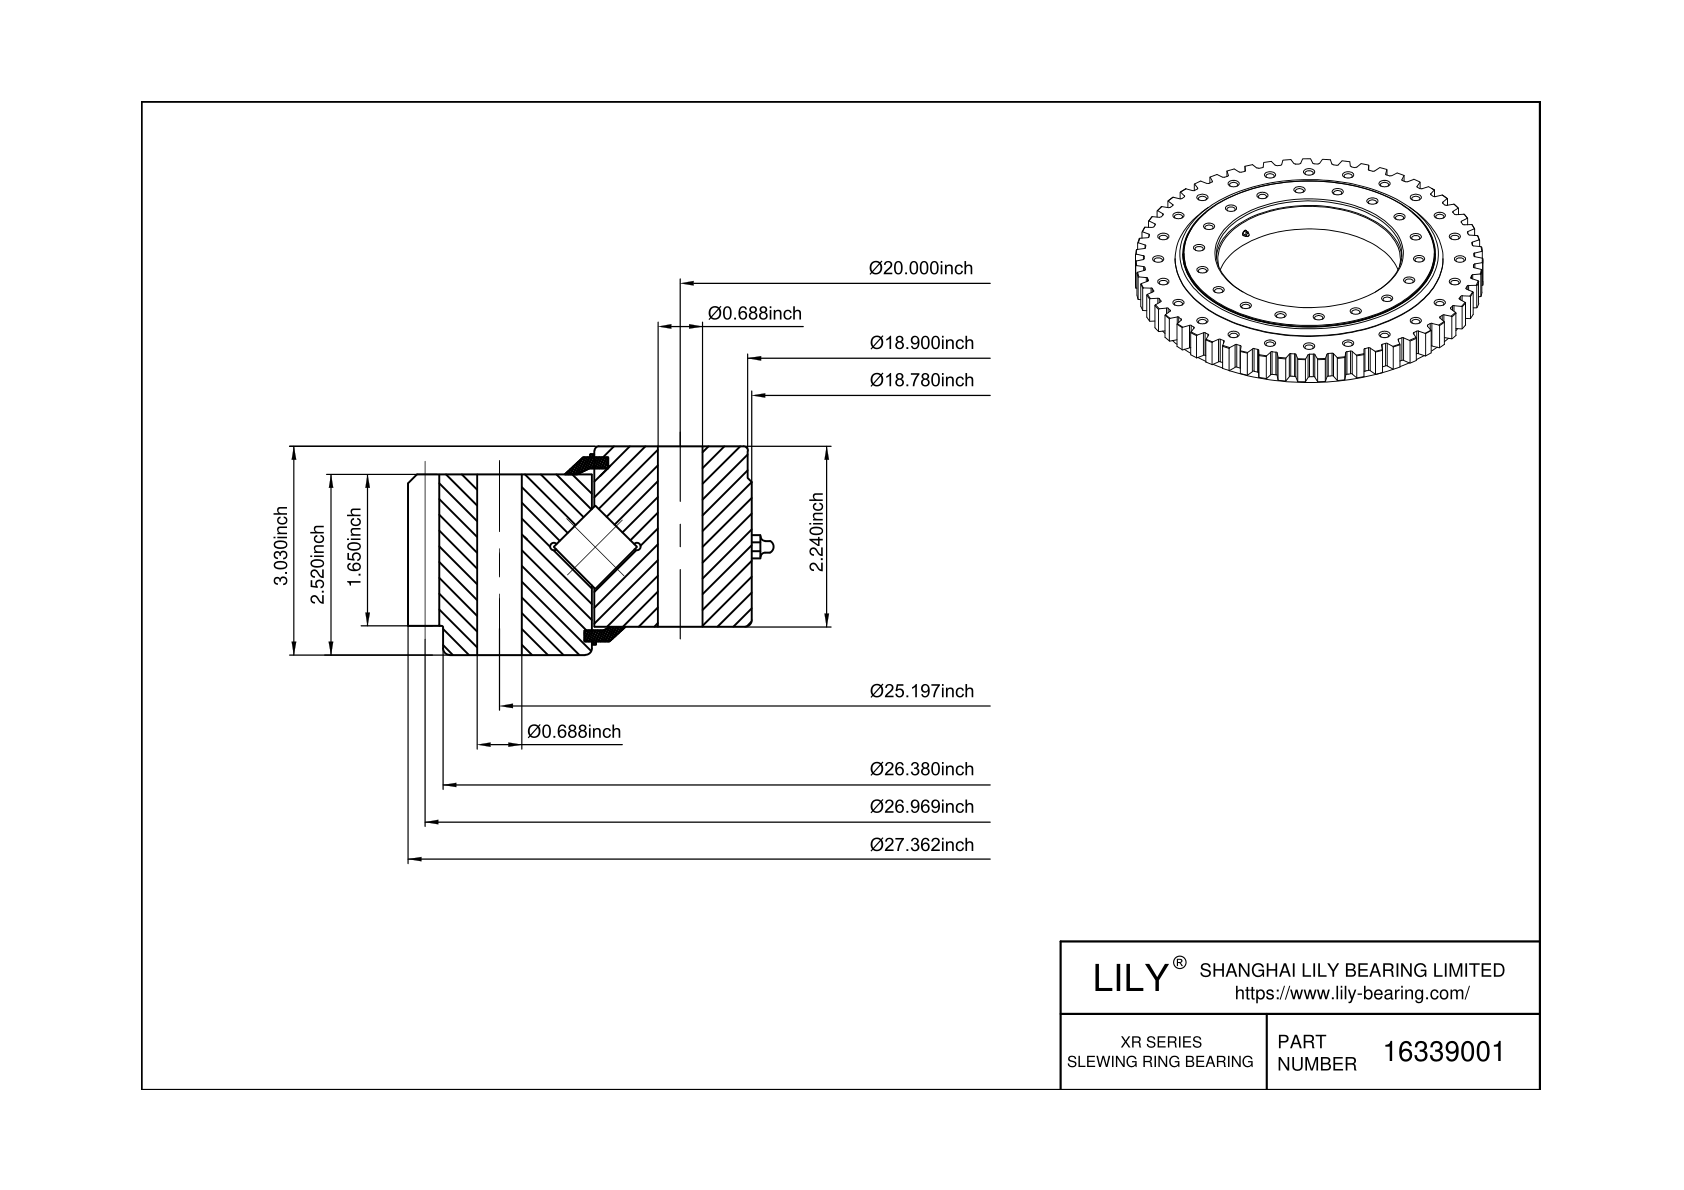 16339001 XR Series cad drawing